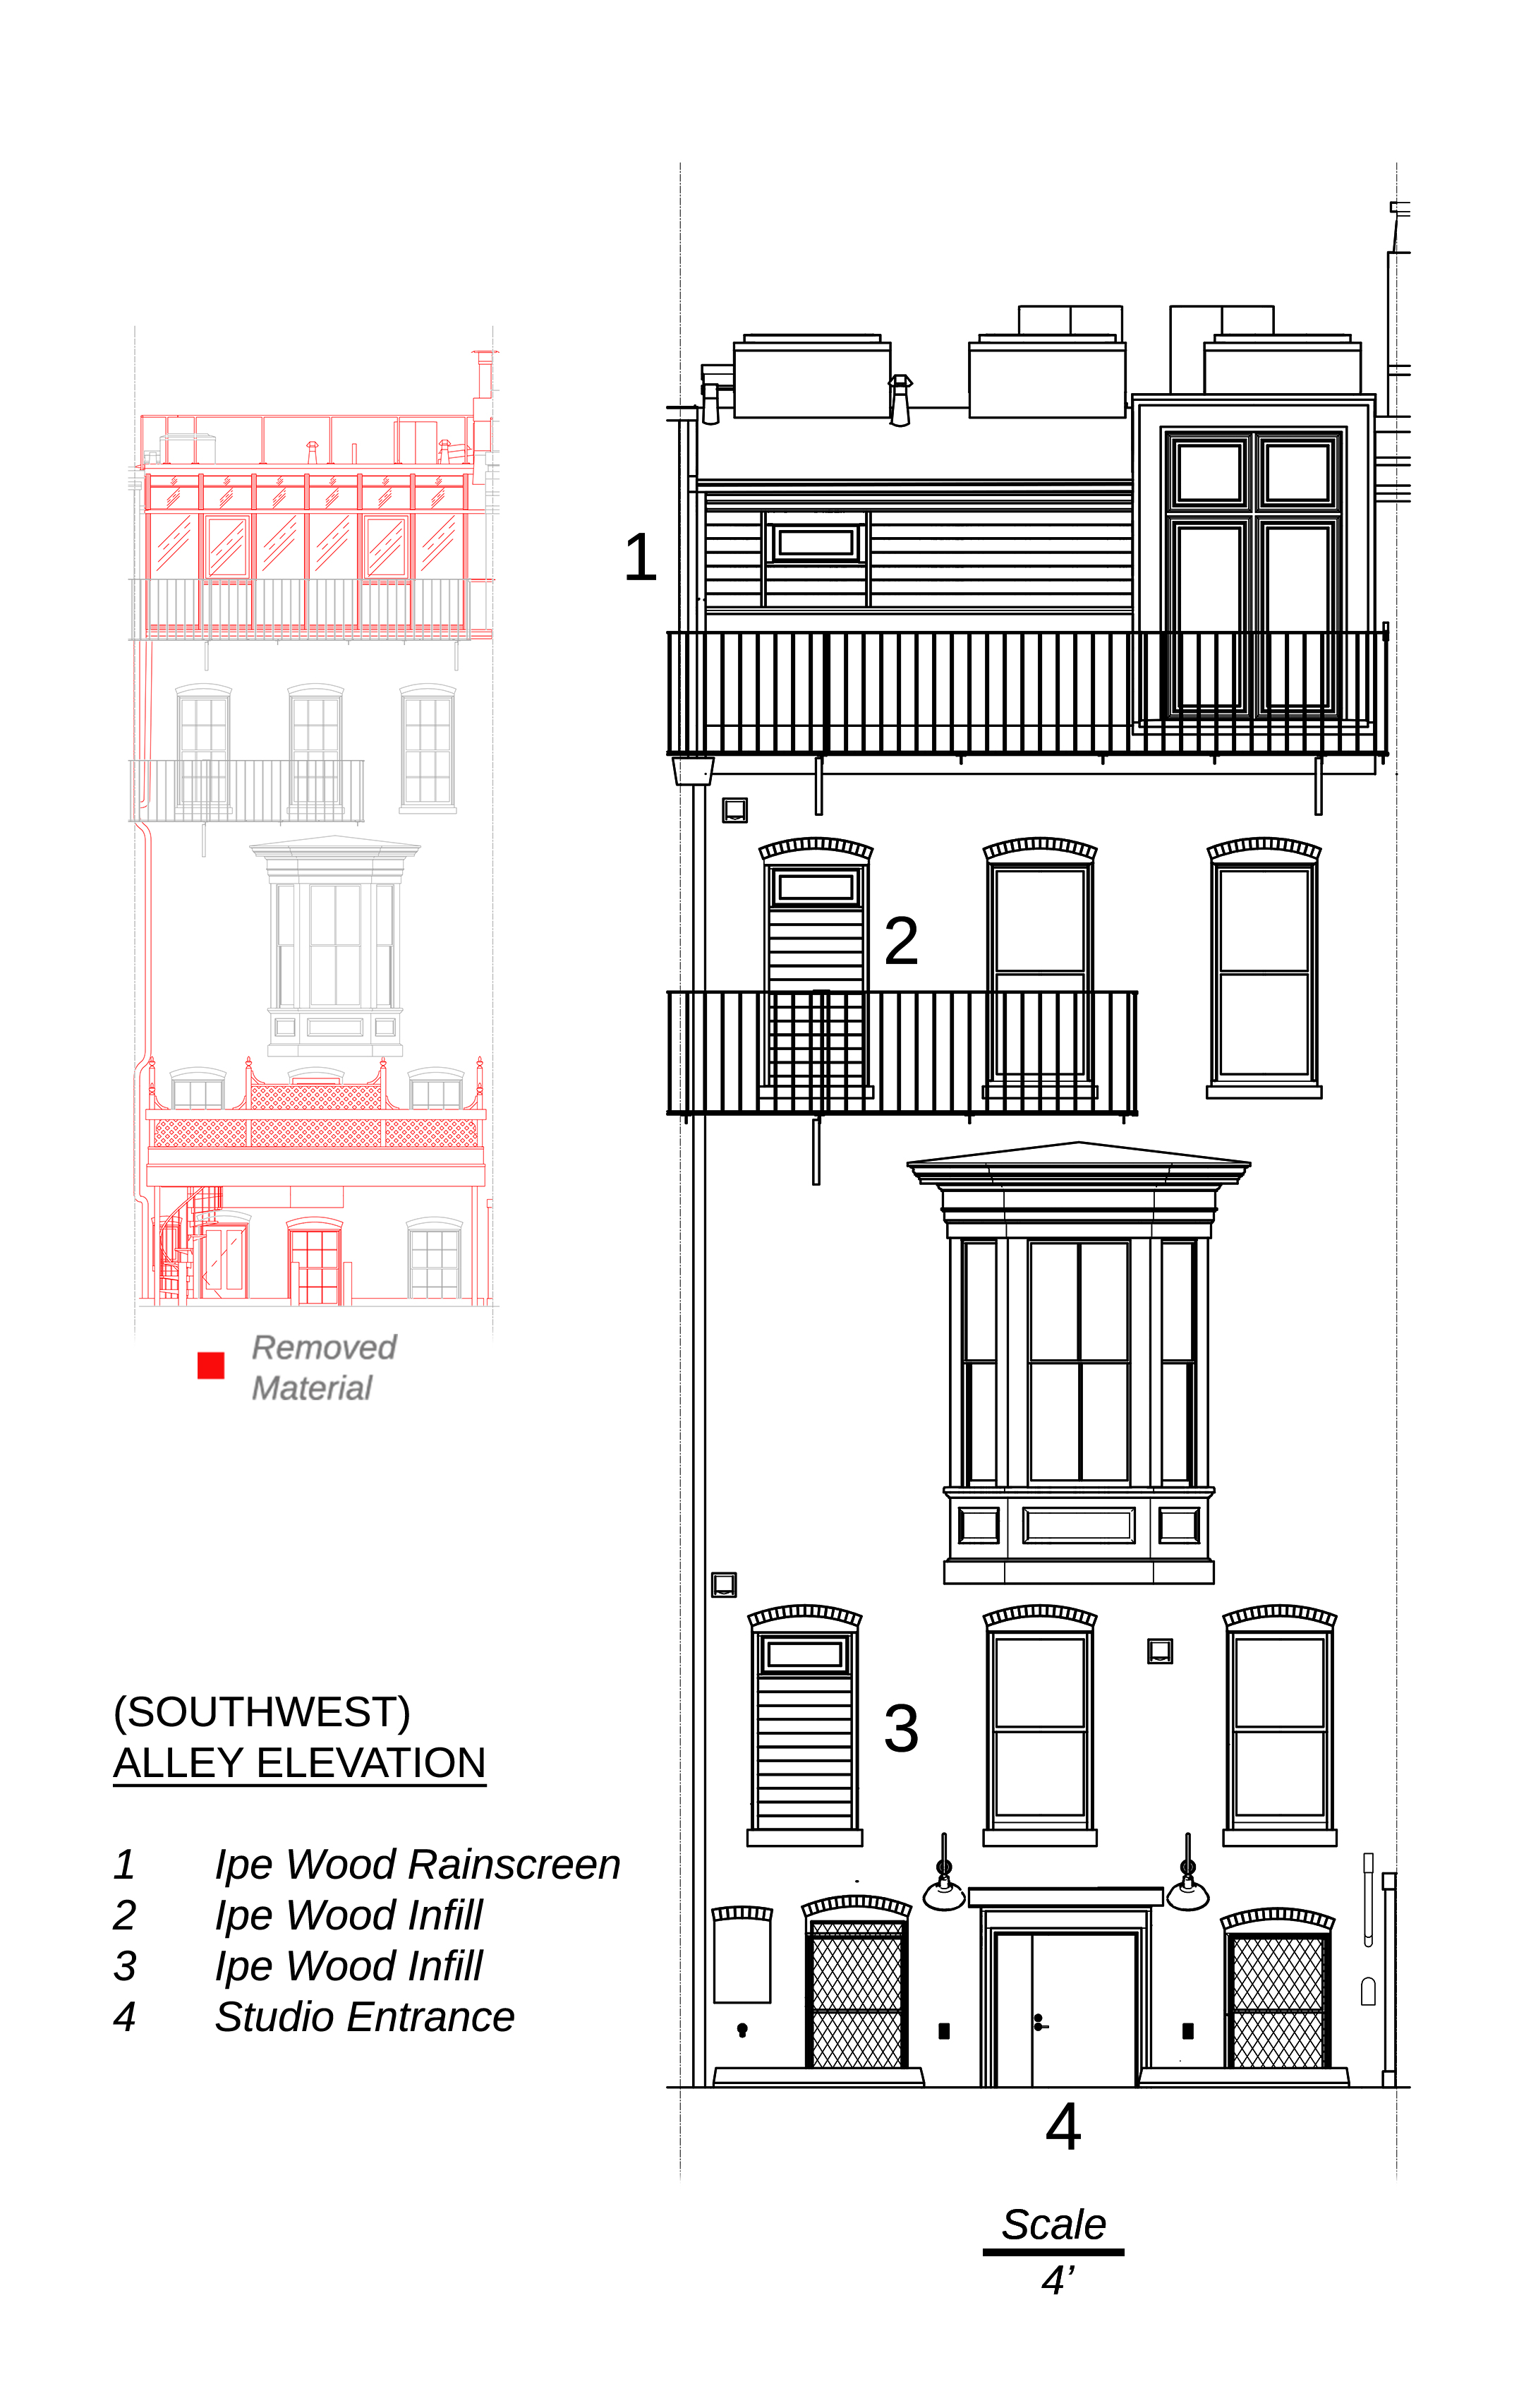 (Southwest) Alley Elevation - click to go to Plans & Elevations album